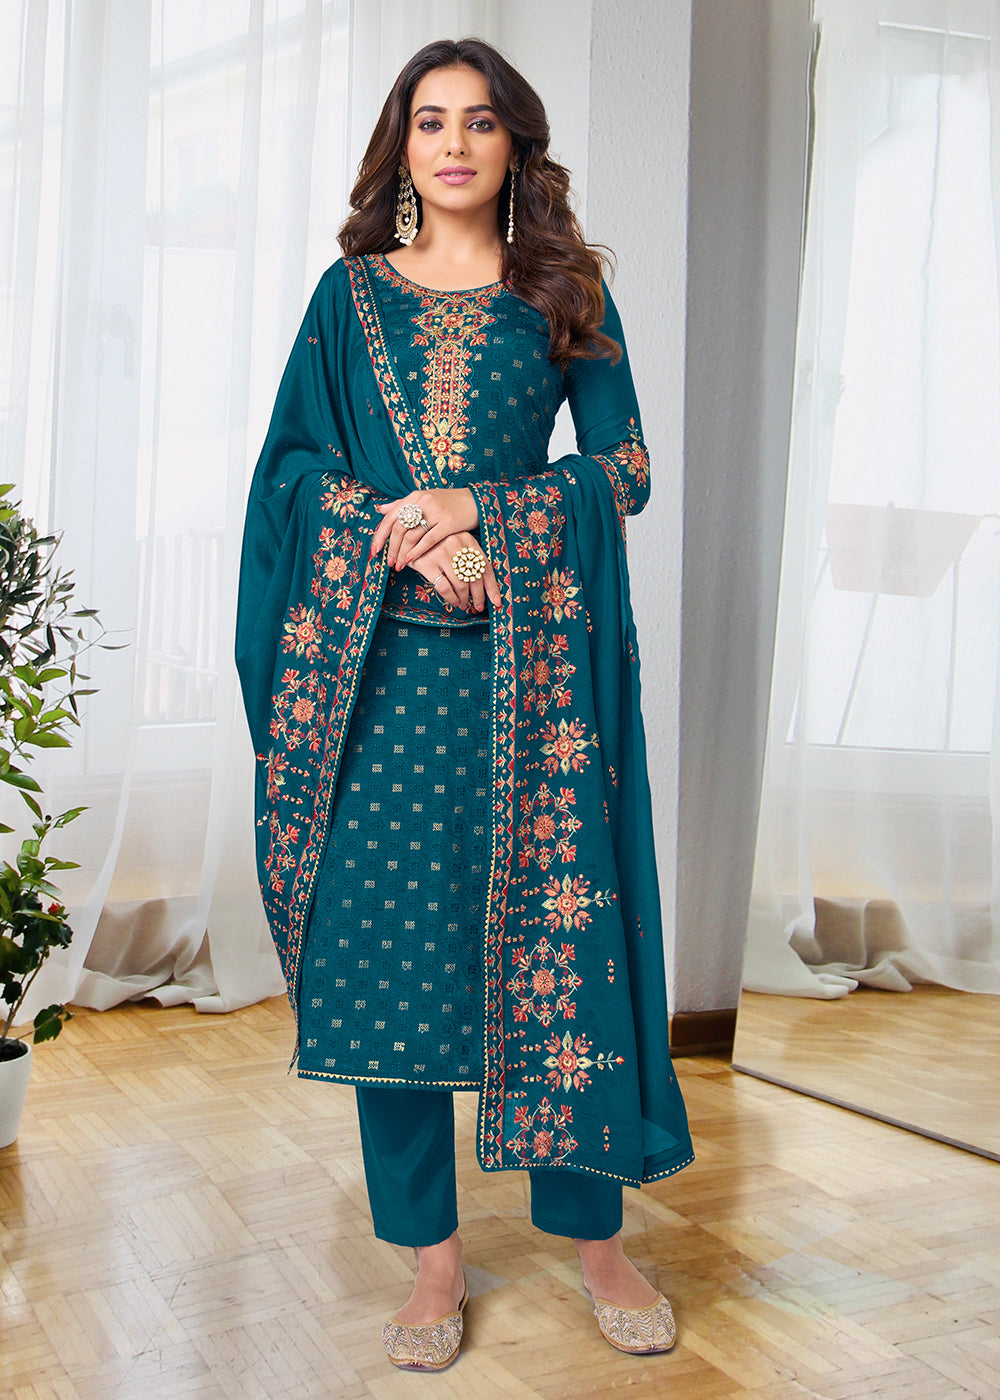 Buy Now Pretty Prussian Blue Beautifully Embroidered Trendy Salwar Kameez Online in USA, UK, Canada, Germany, Australia & Worldwide at Empress Clothing.